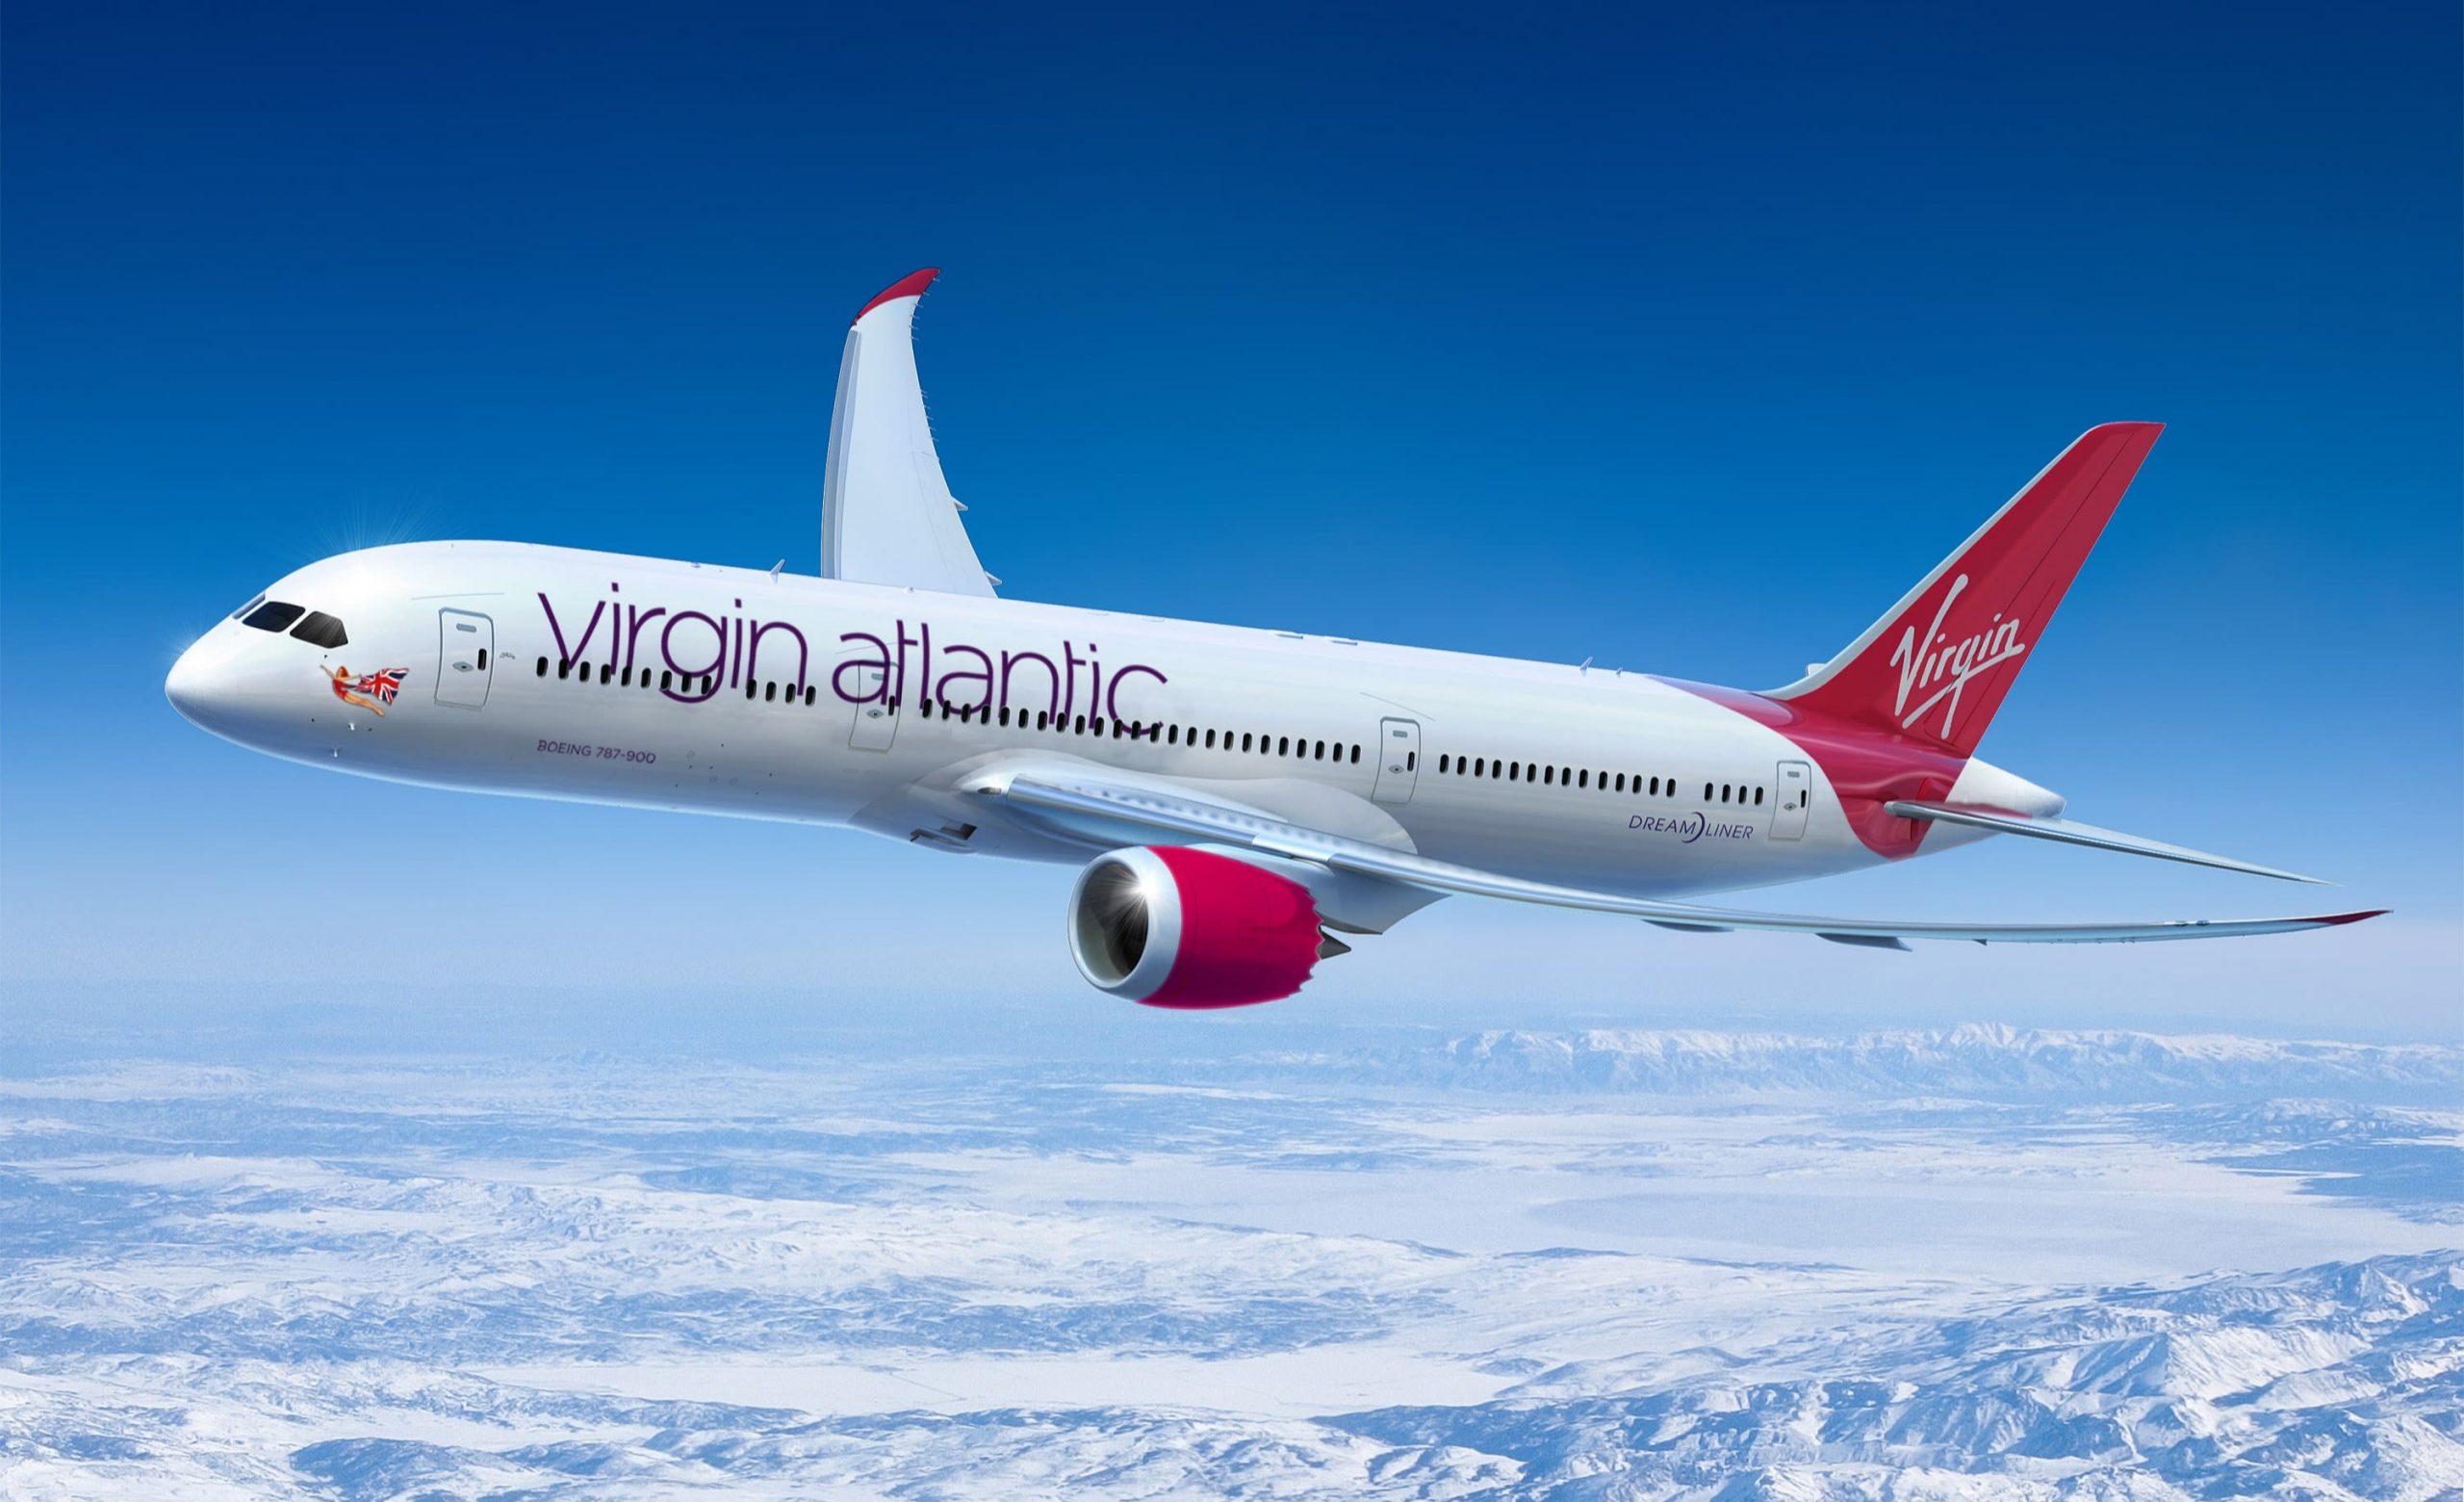 Ways in which Ethical Issues Influence Marketing Planning Within Virgin Atlantic